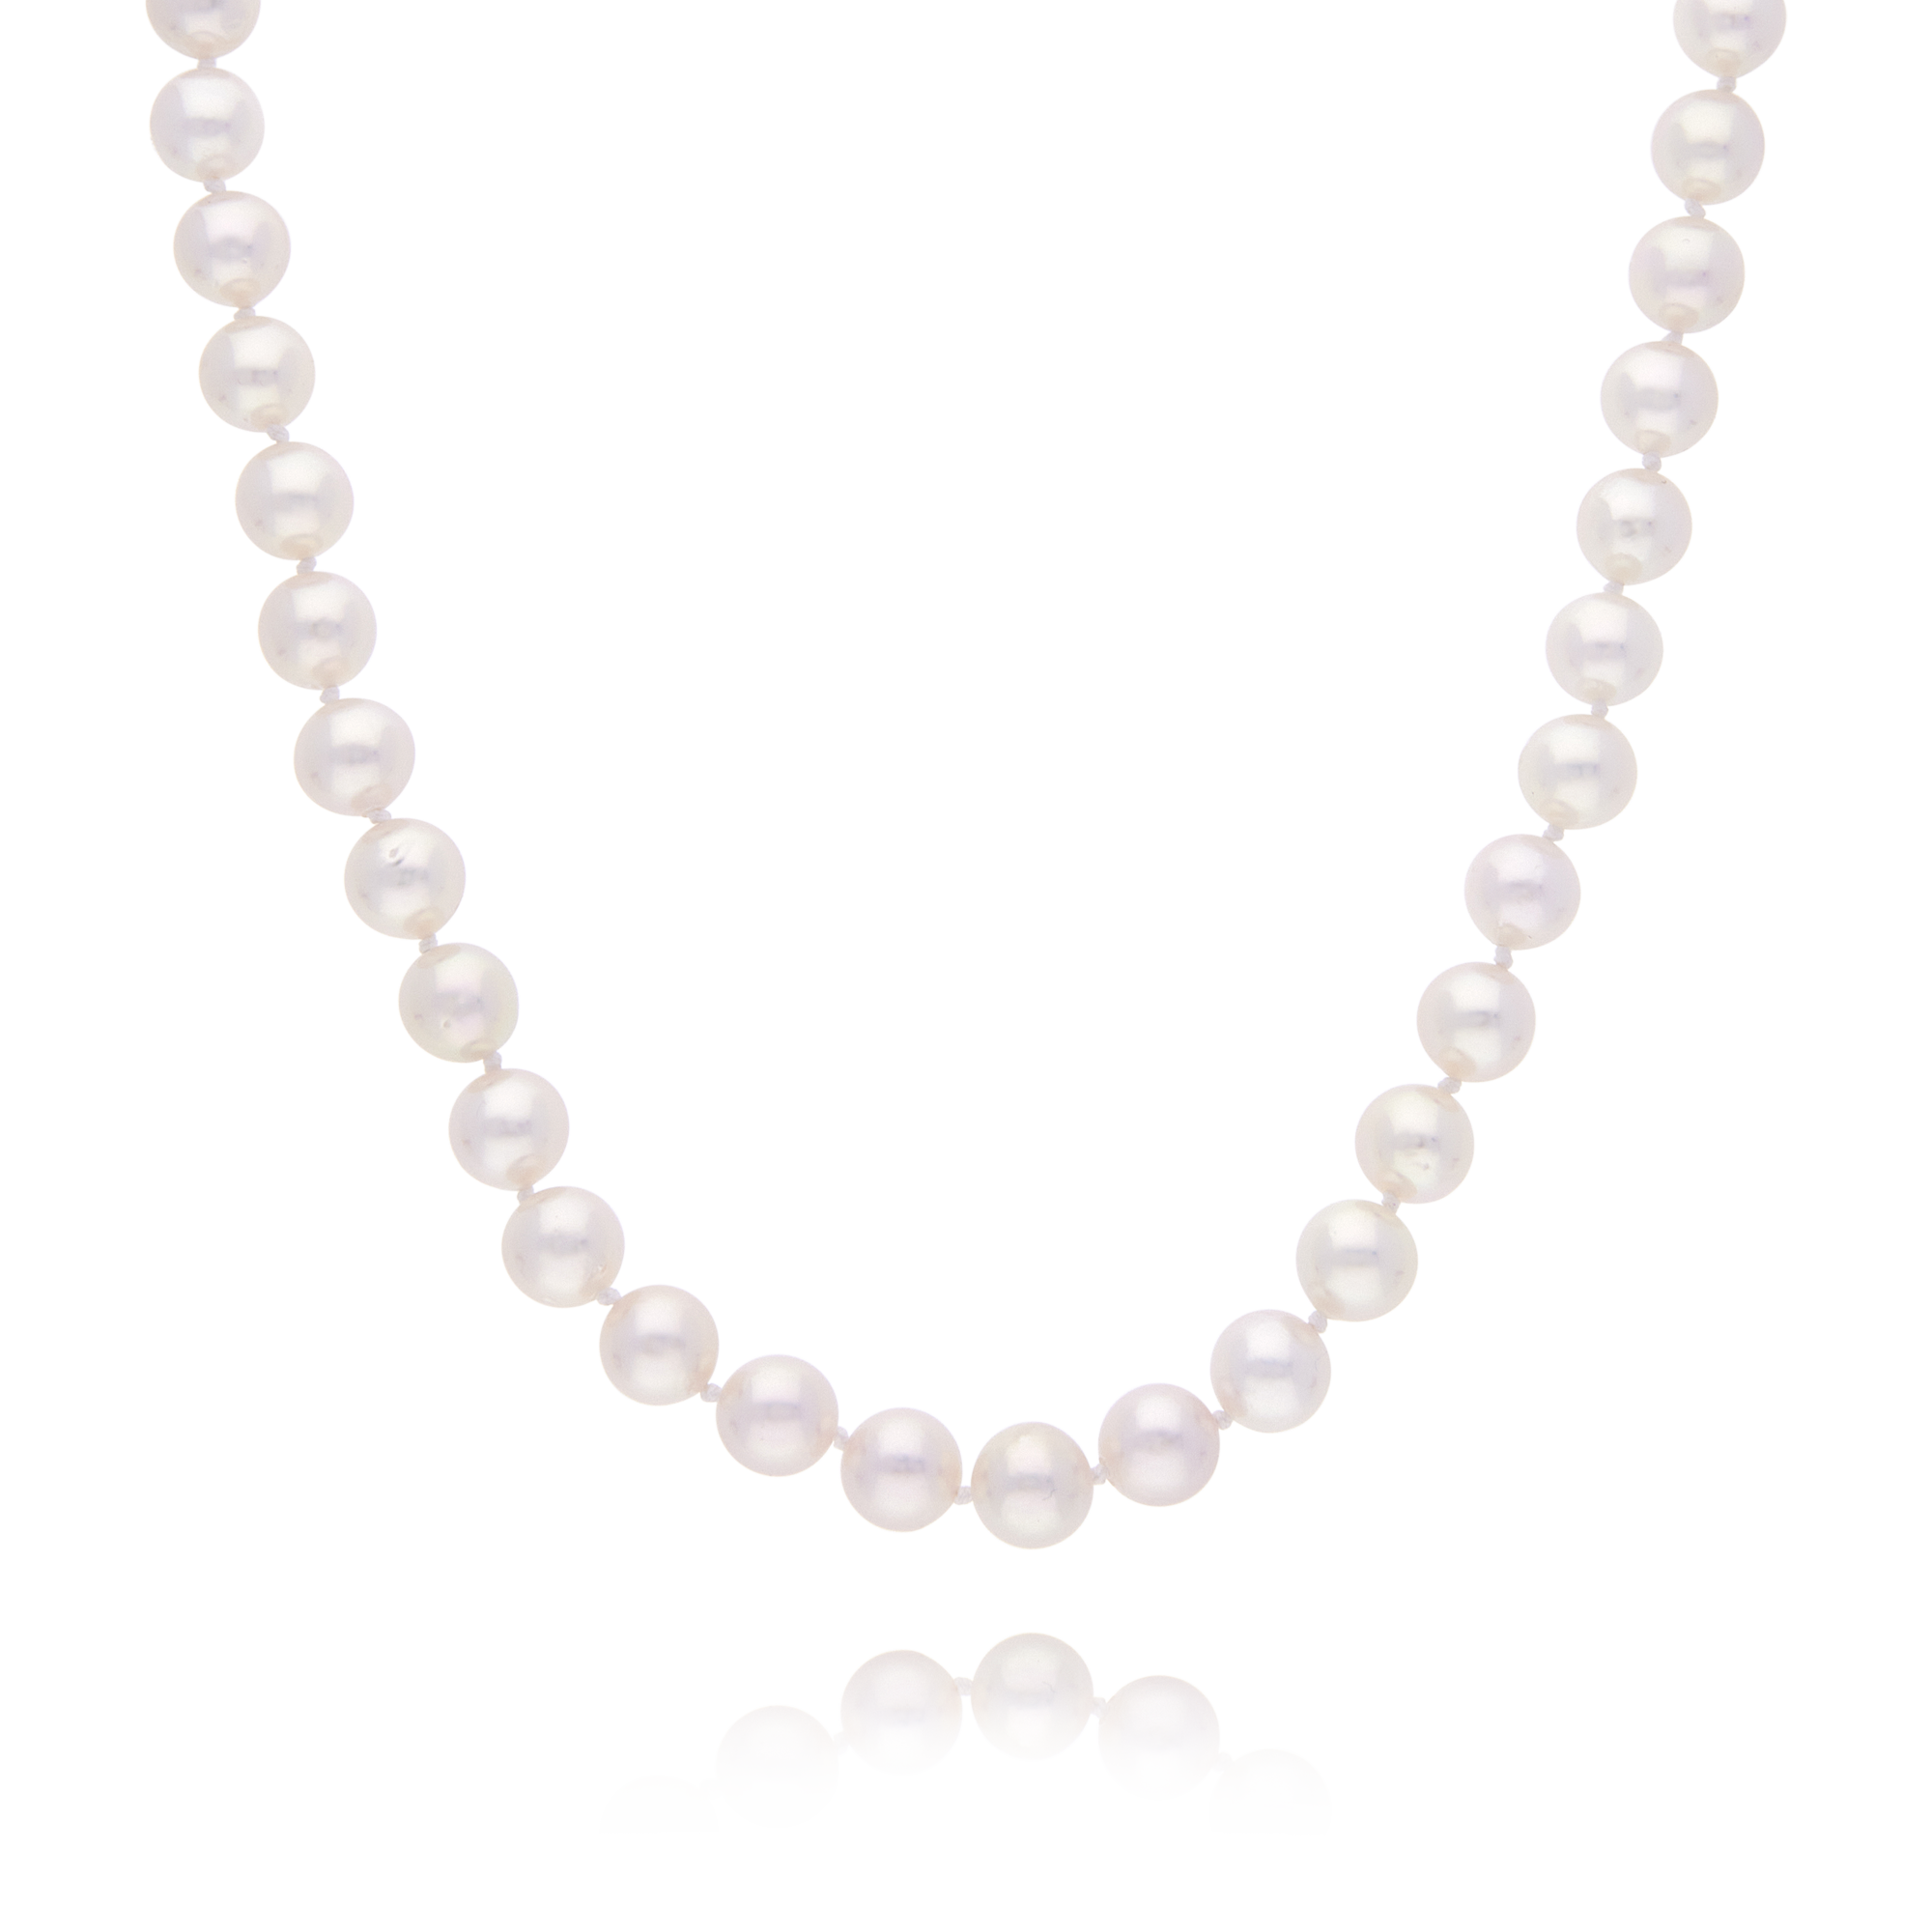 White Japanese Akoya Pearl Necklace & Earring 2-Piece Set, 7.0-7.5mm -  Pearls of Joy